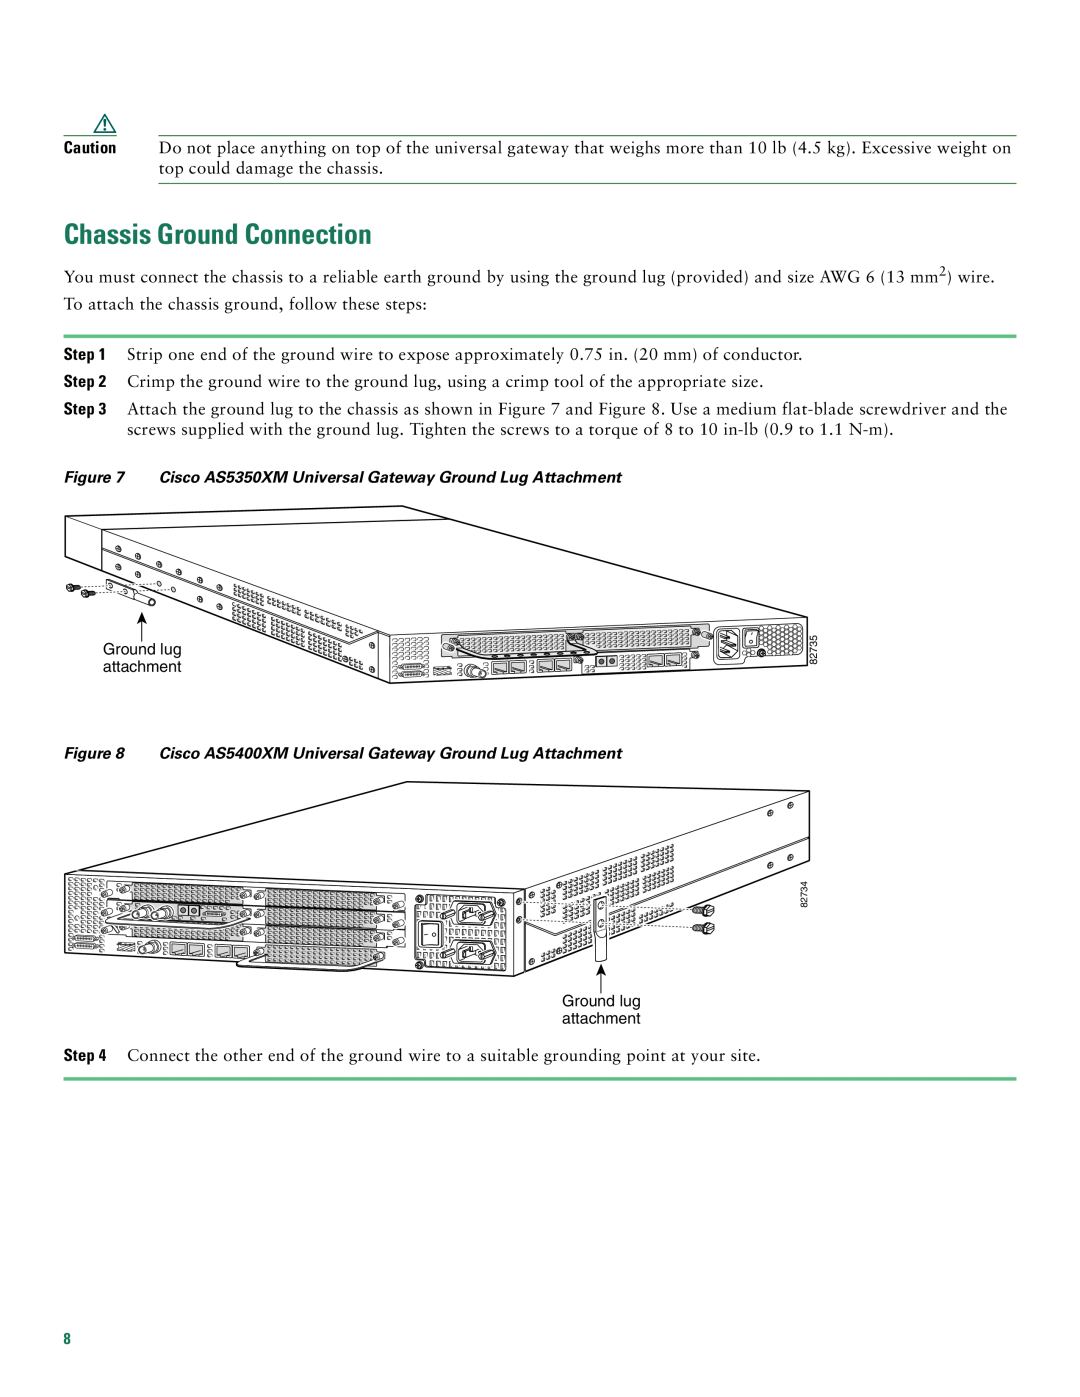 Cisco Systems AS5400XM quick start Chassis Ground Connection 